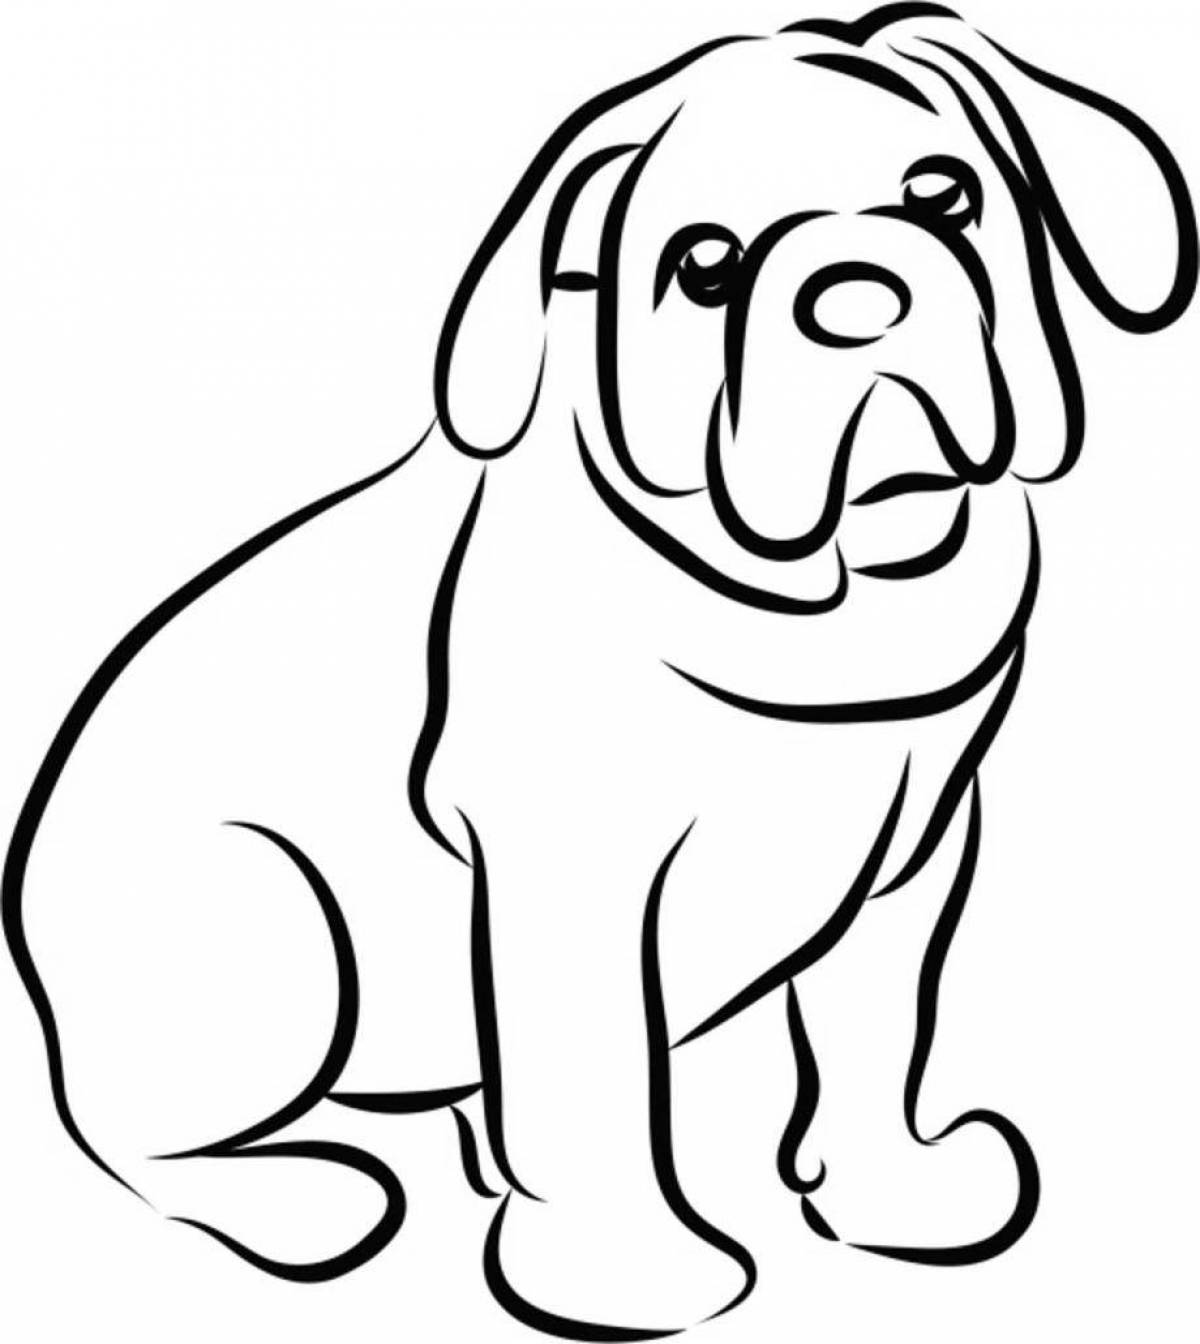 Coloring page charming shar pei